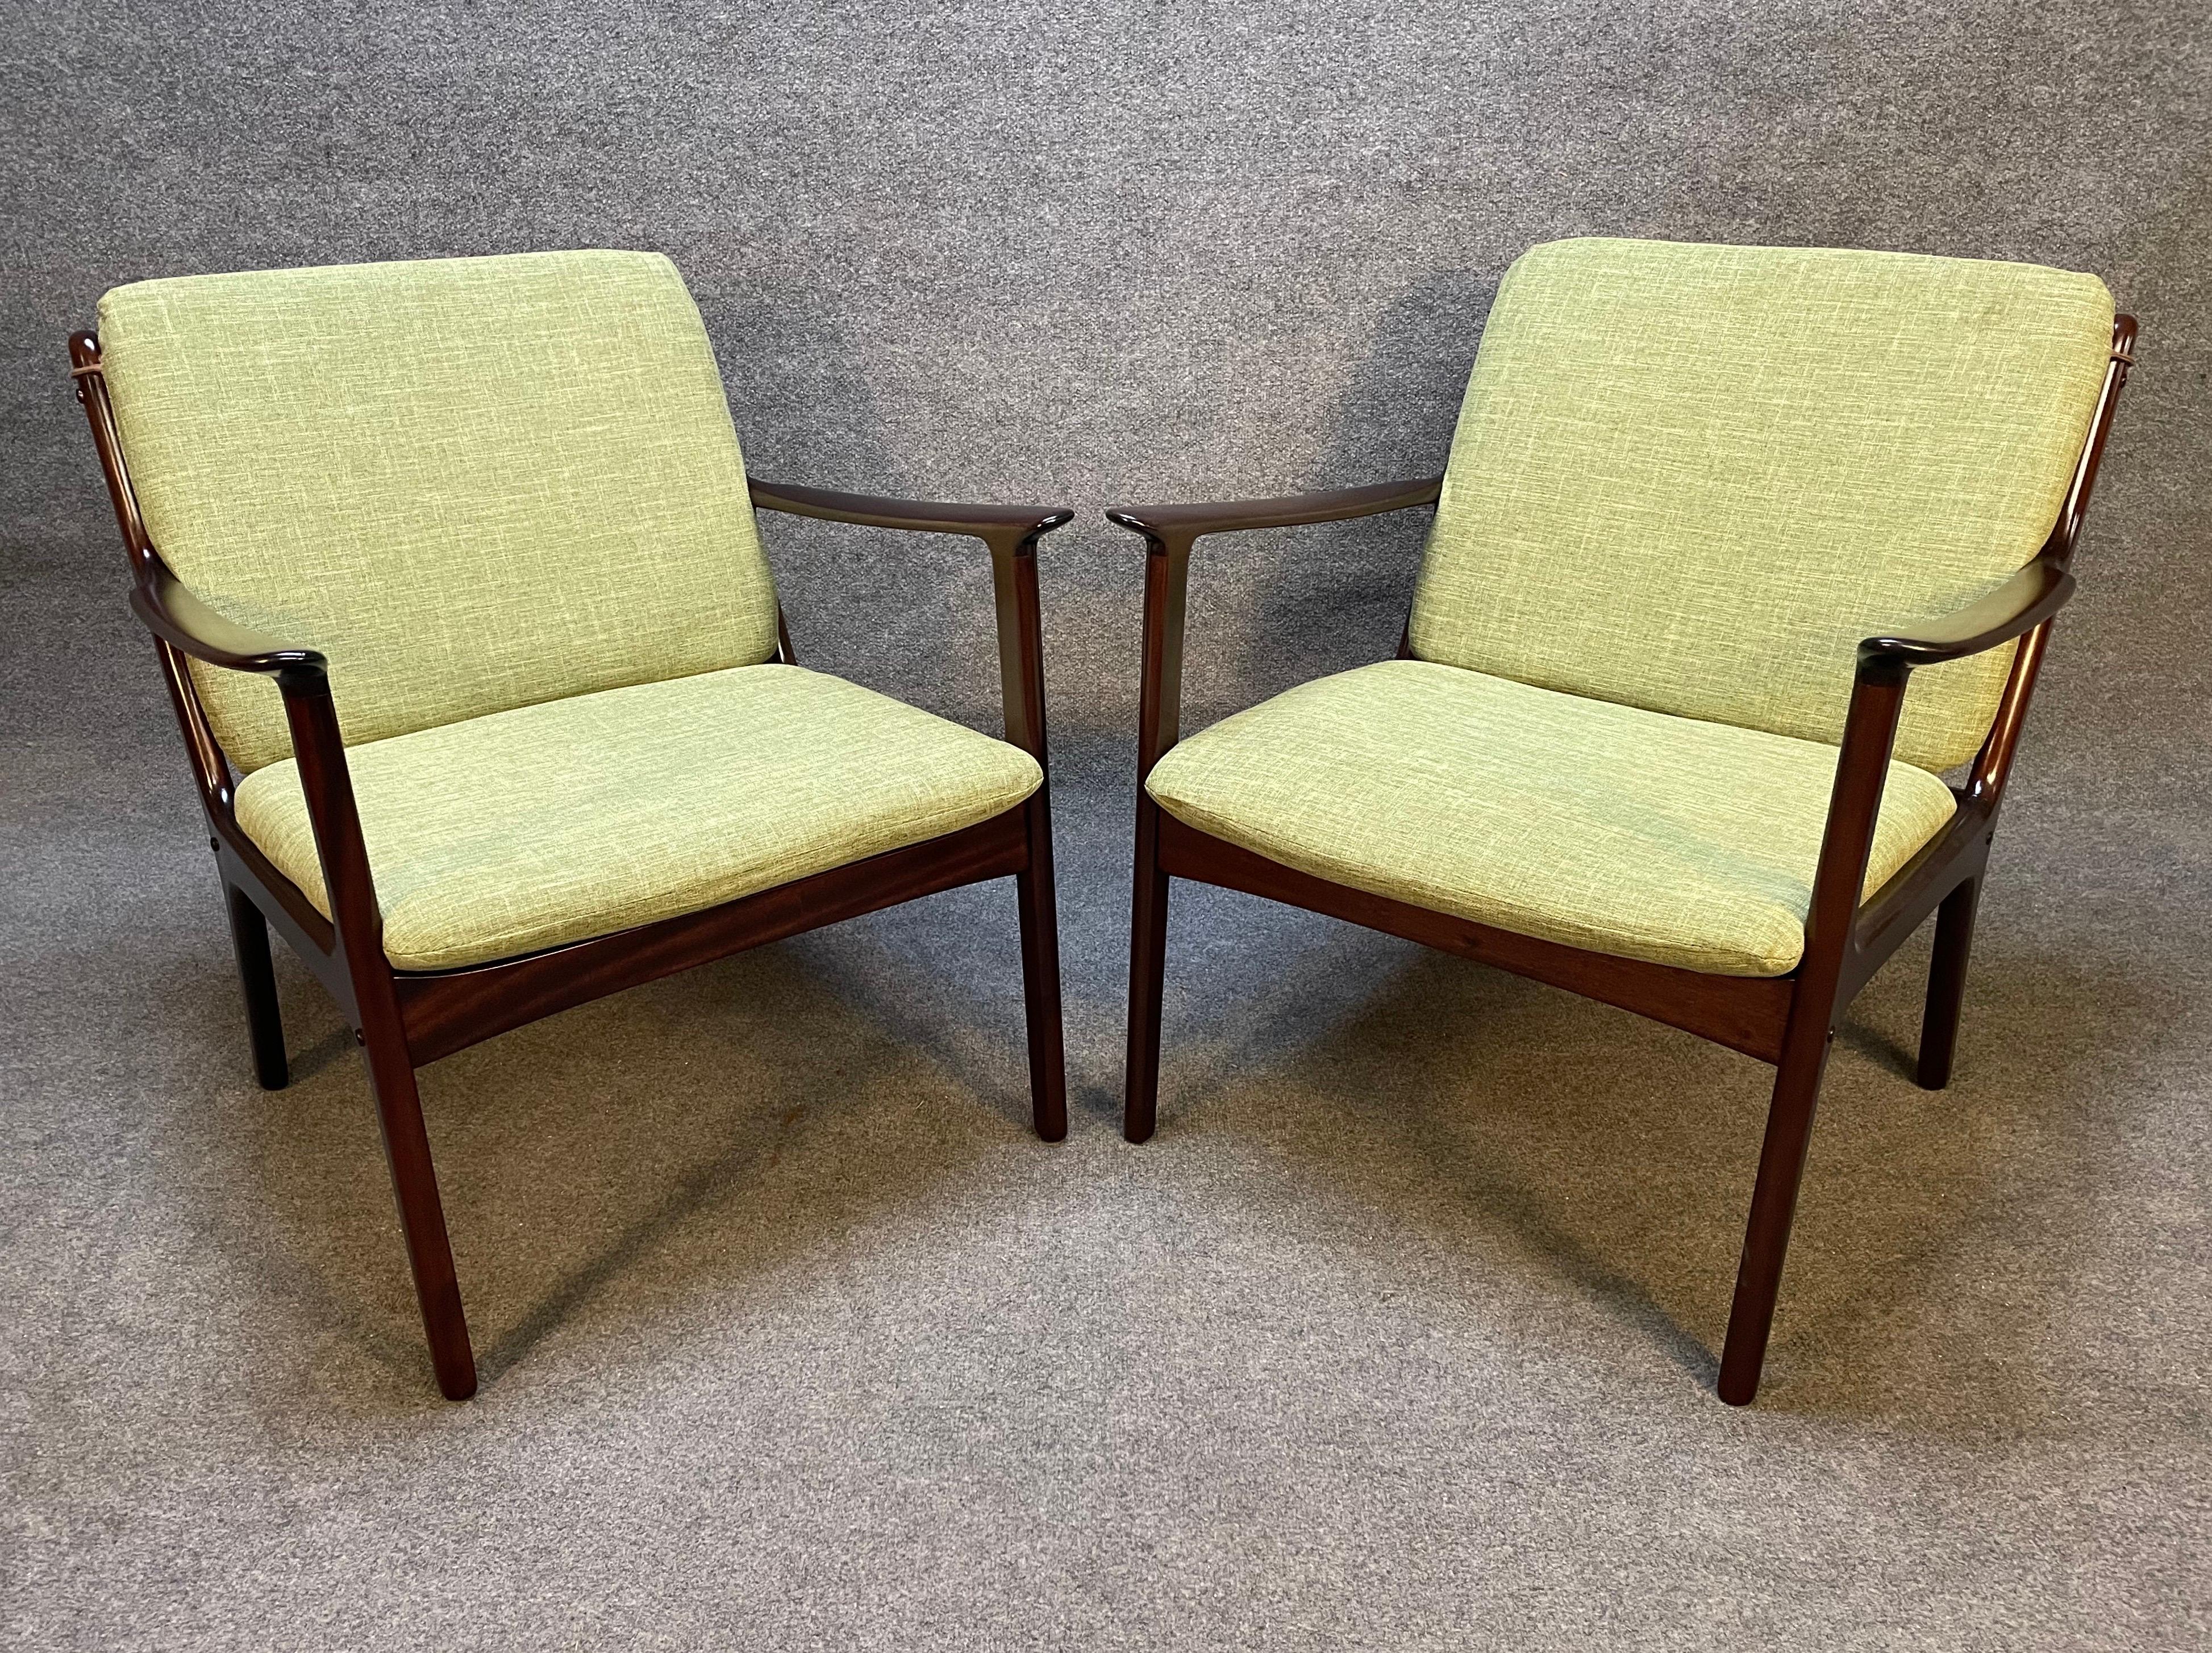 Here is beautiful set of two Scandinavian Modern easy chair Model PJ112 in mahogany designed by professor Ole Wanscher and manufactured by Poul Jeppesen in Denmark in the 1960s. These comfortable chairs, recently imported from Copenhagen to